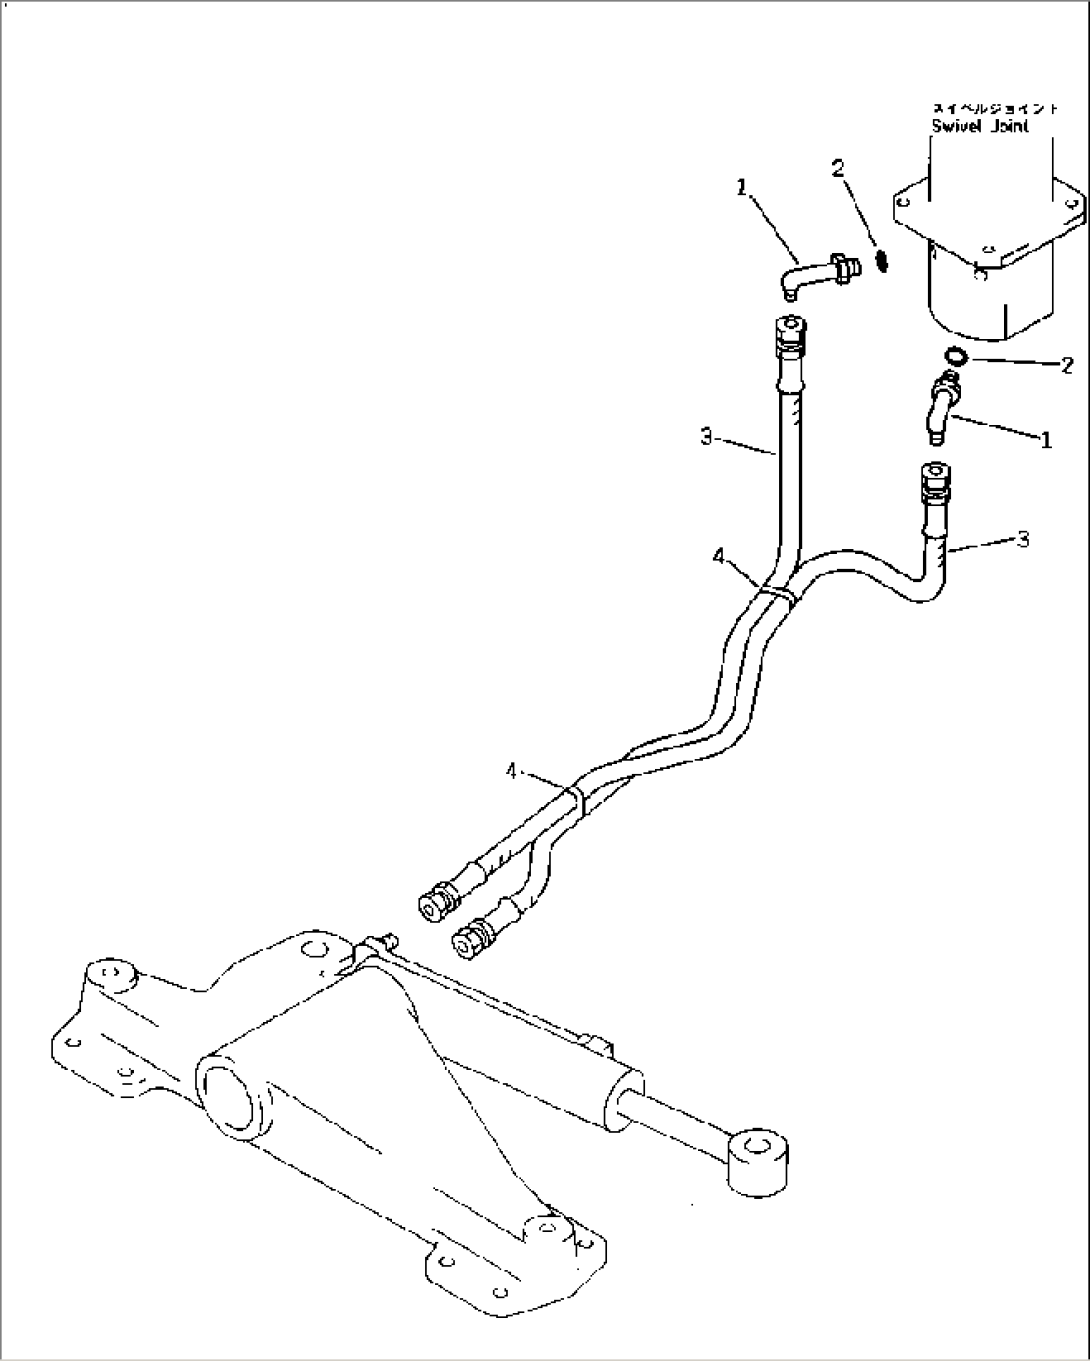 STEERING PIPING (2/3) (SWIVEL JOINT TO CYLINDER) (TBG¤ ABE SPEC.)